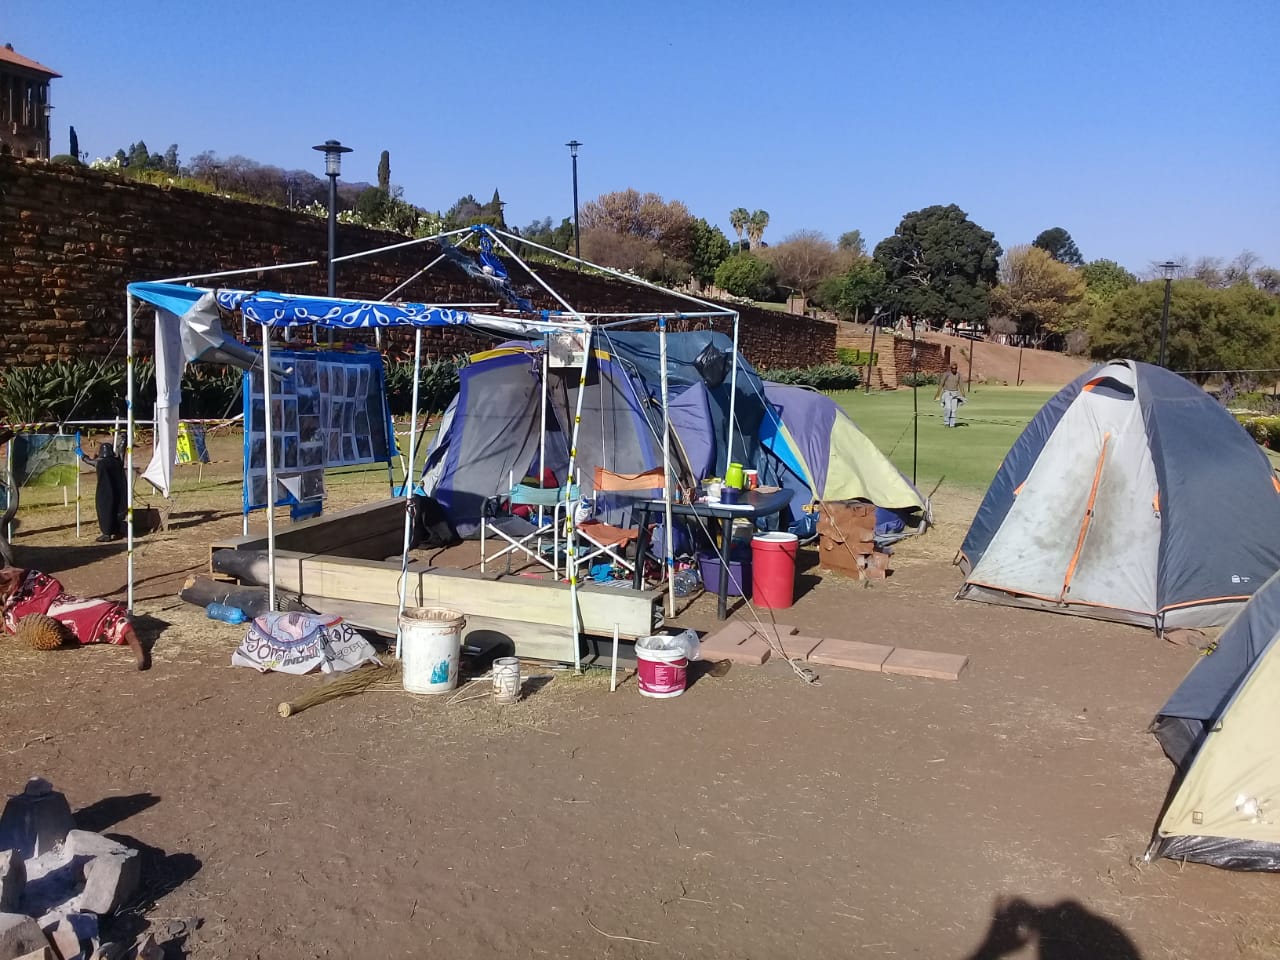 Damage to Tents Sep2019